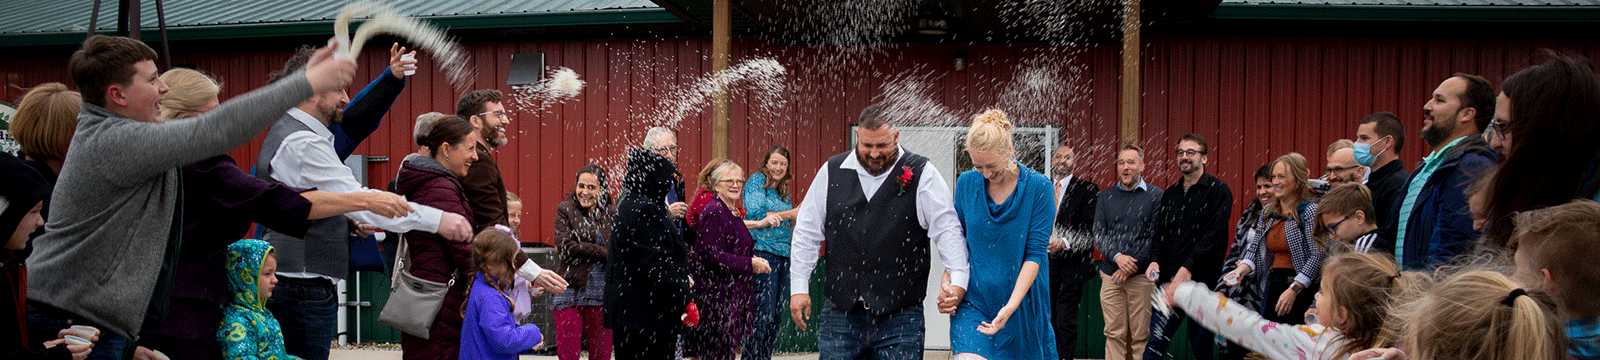 Man and woman leaving wedding venue while guests toss rice.